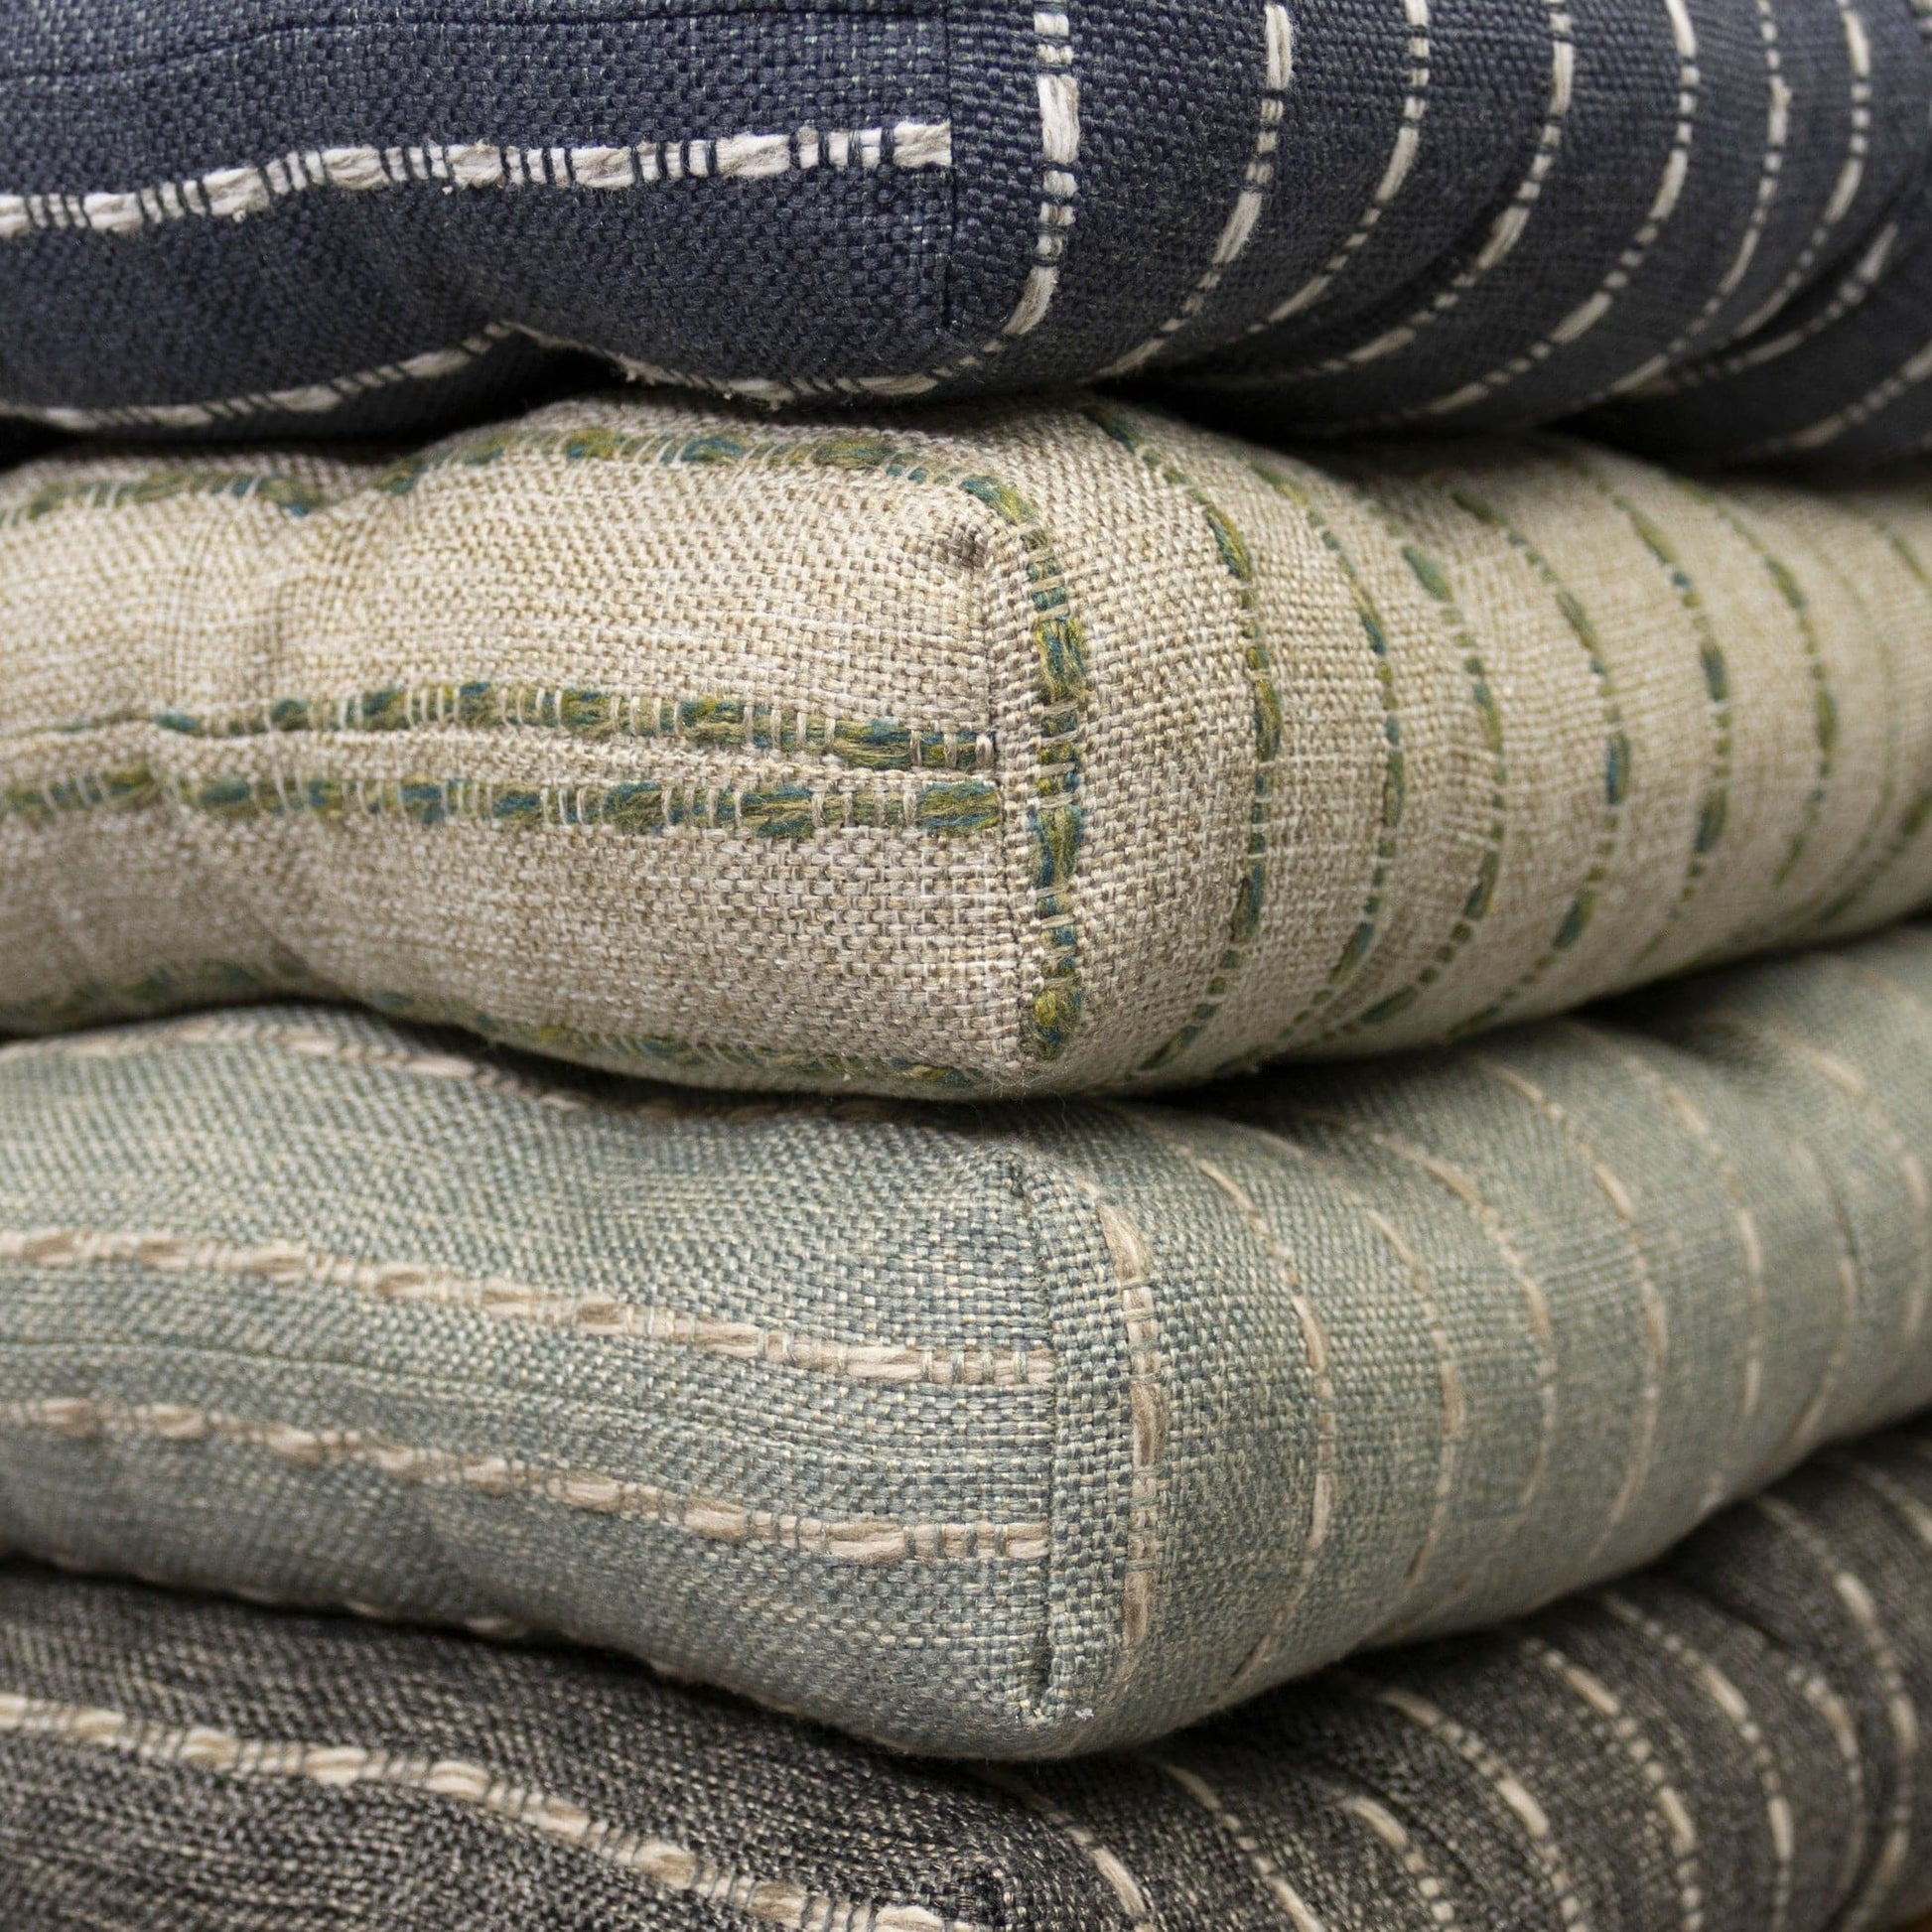 sustainable dining chair cushions made with recycled materials and low carbon footprint fabrics